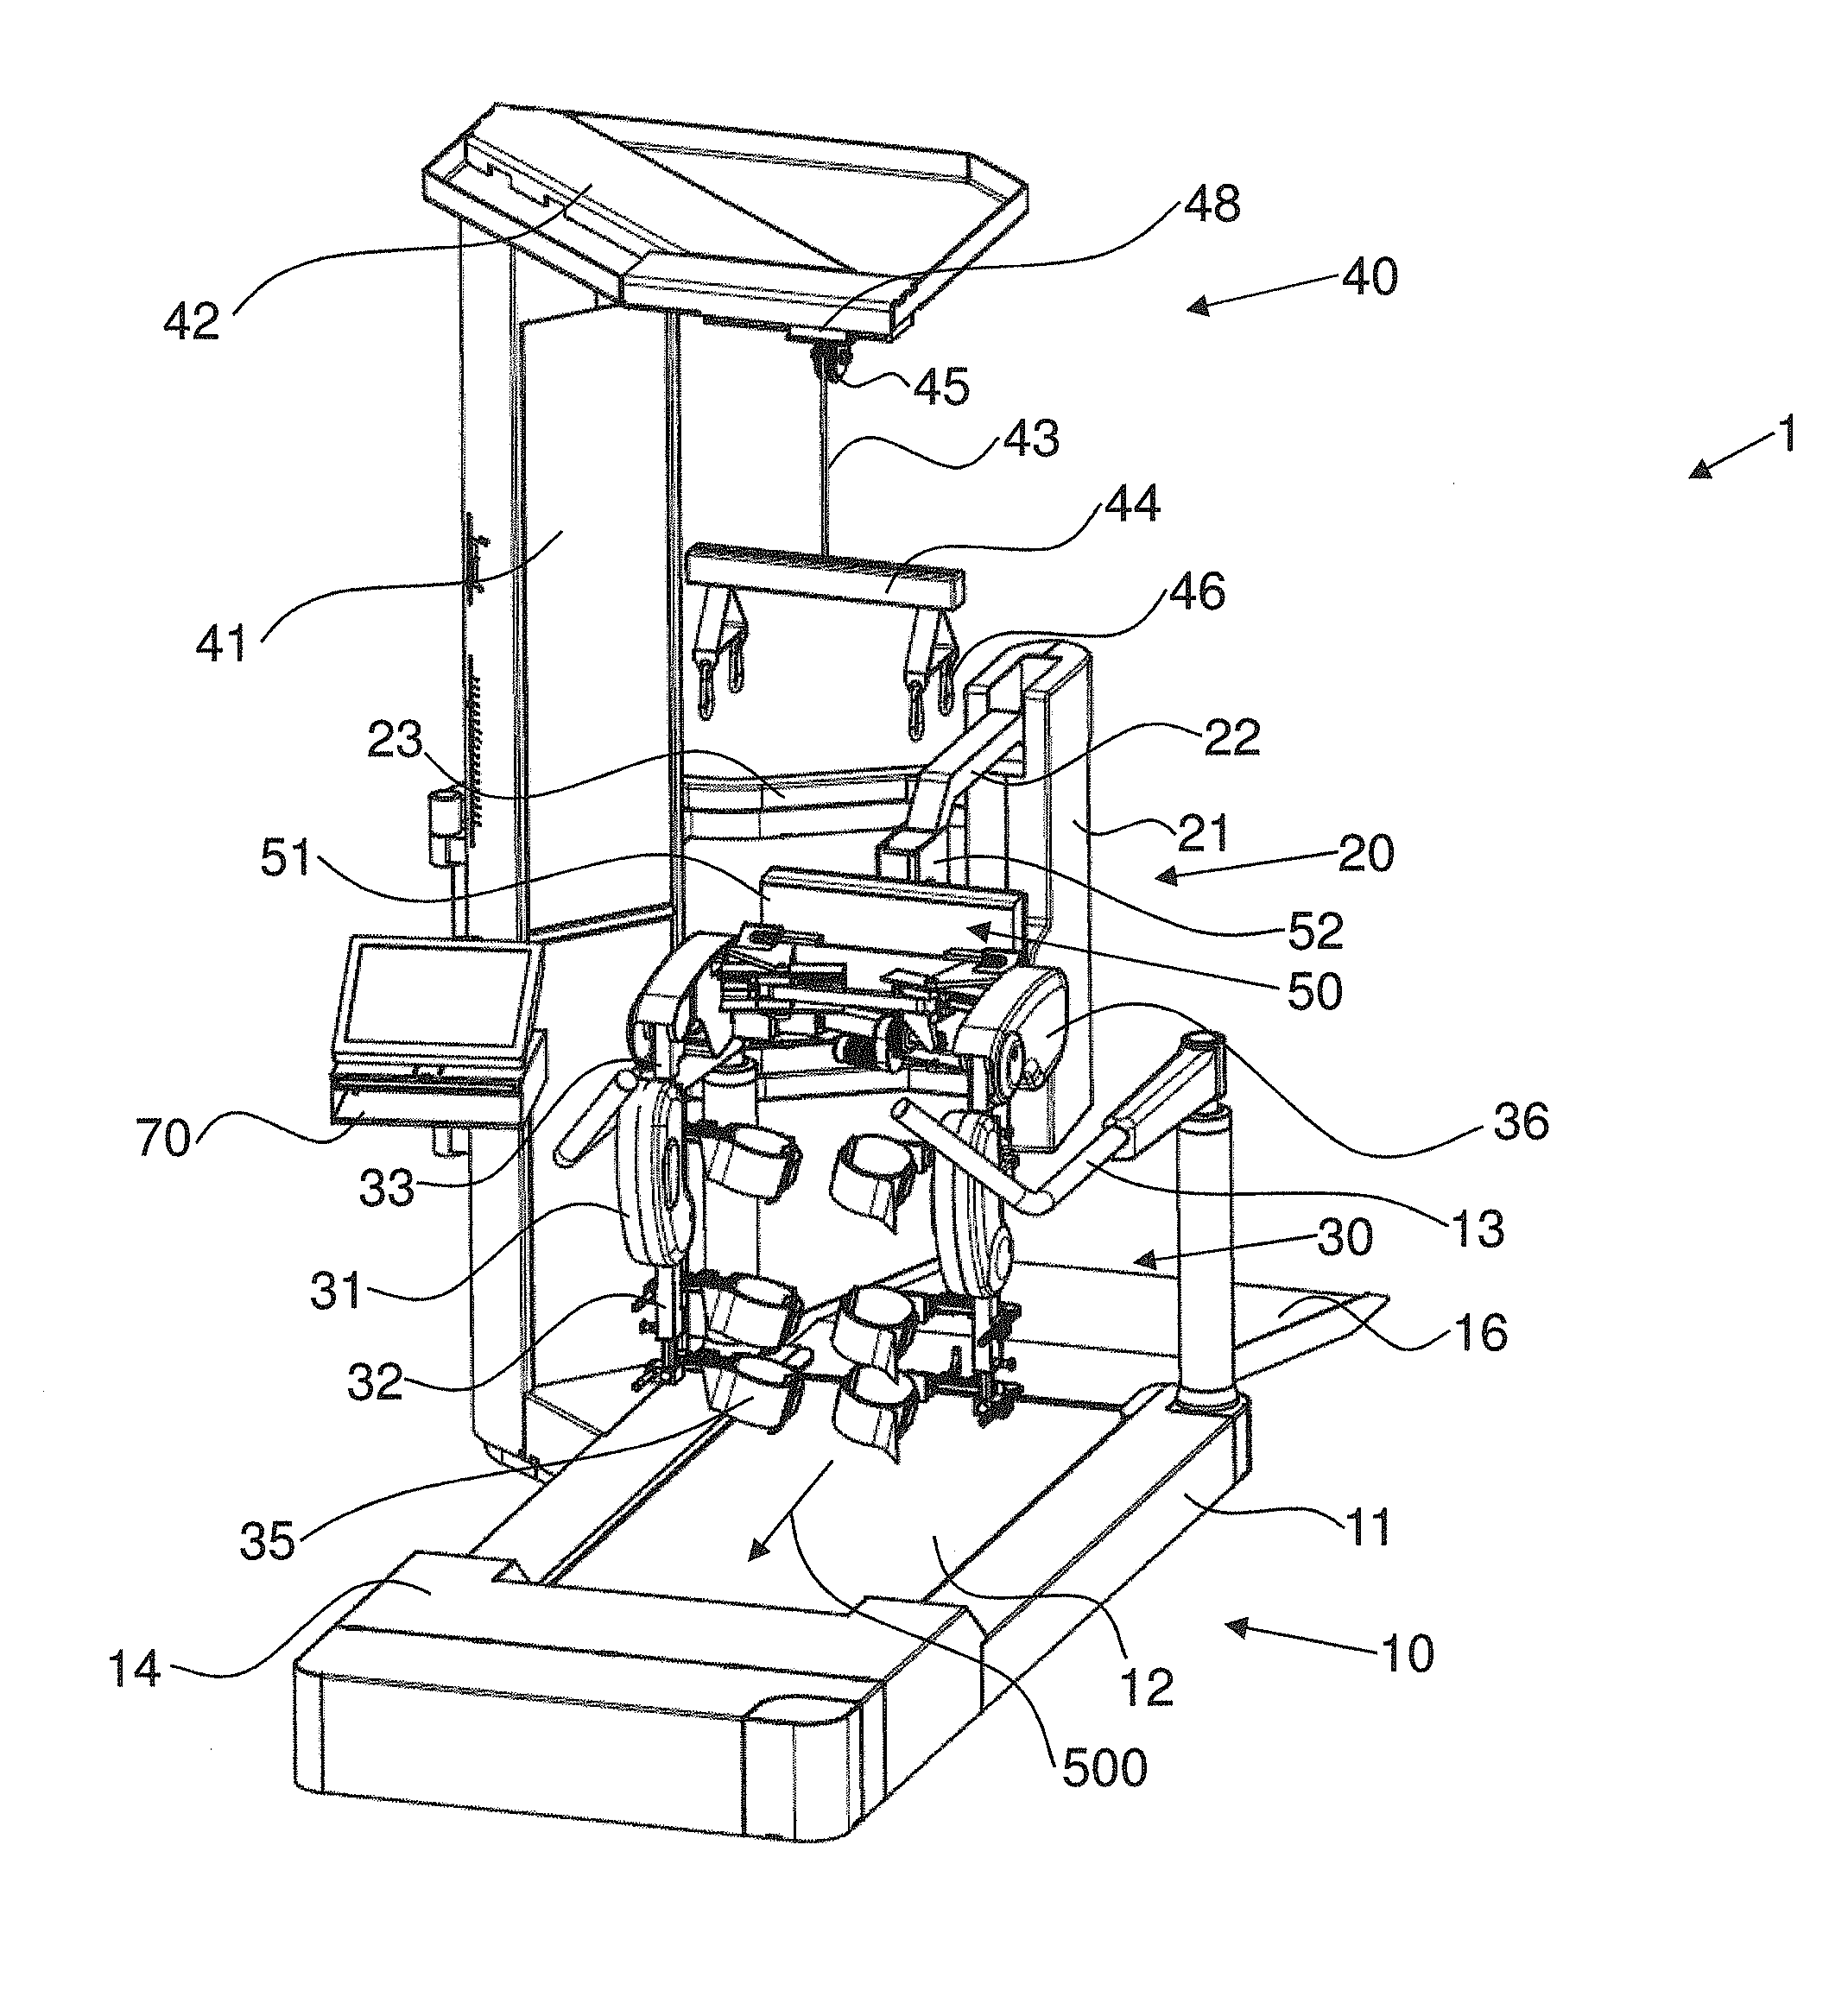 Apparatus for Automated Walking Training